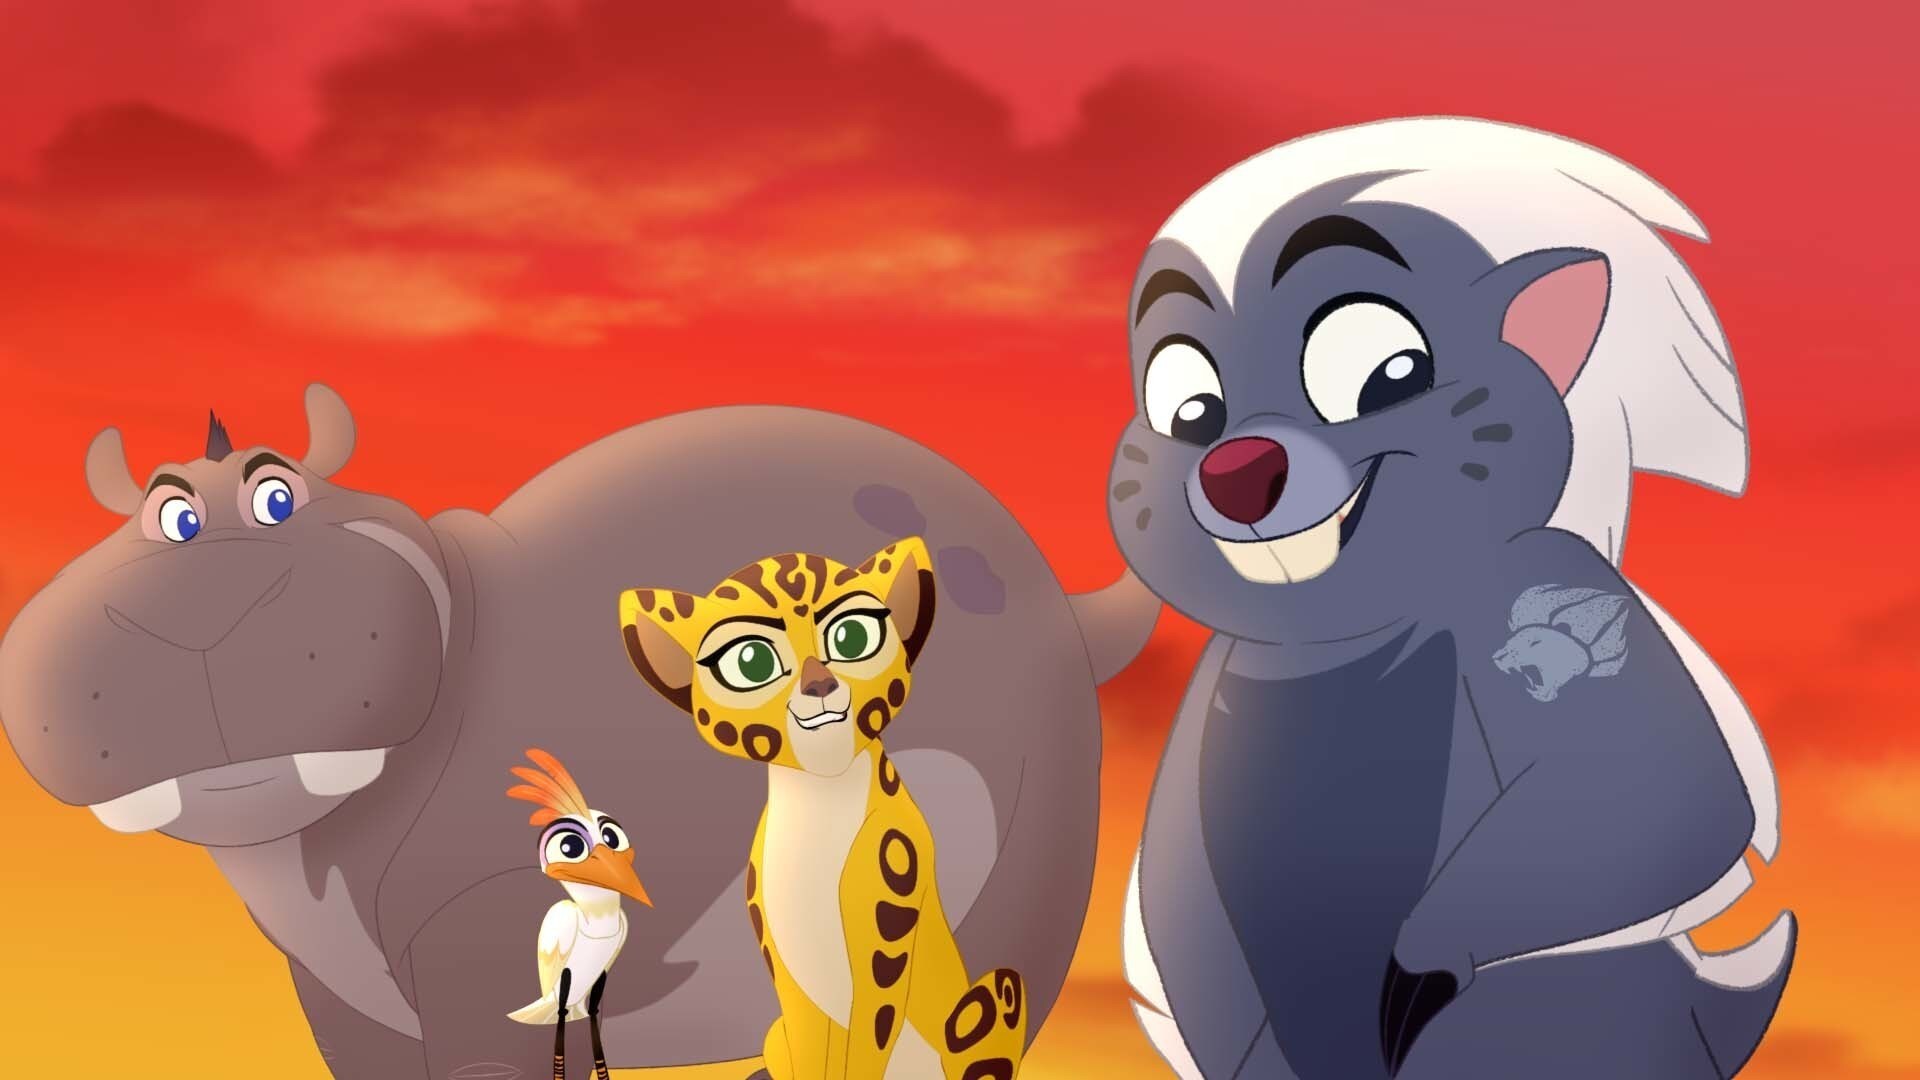 The Lion Guard (left to right), Beshte the strongest, Ono the keenest of sight, Fuli the fastest, and Bunga the bravest. From the movie "The Lion Guard: Return of the Roar"